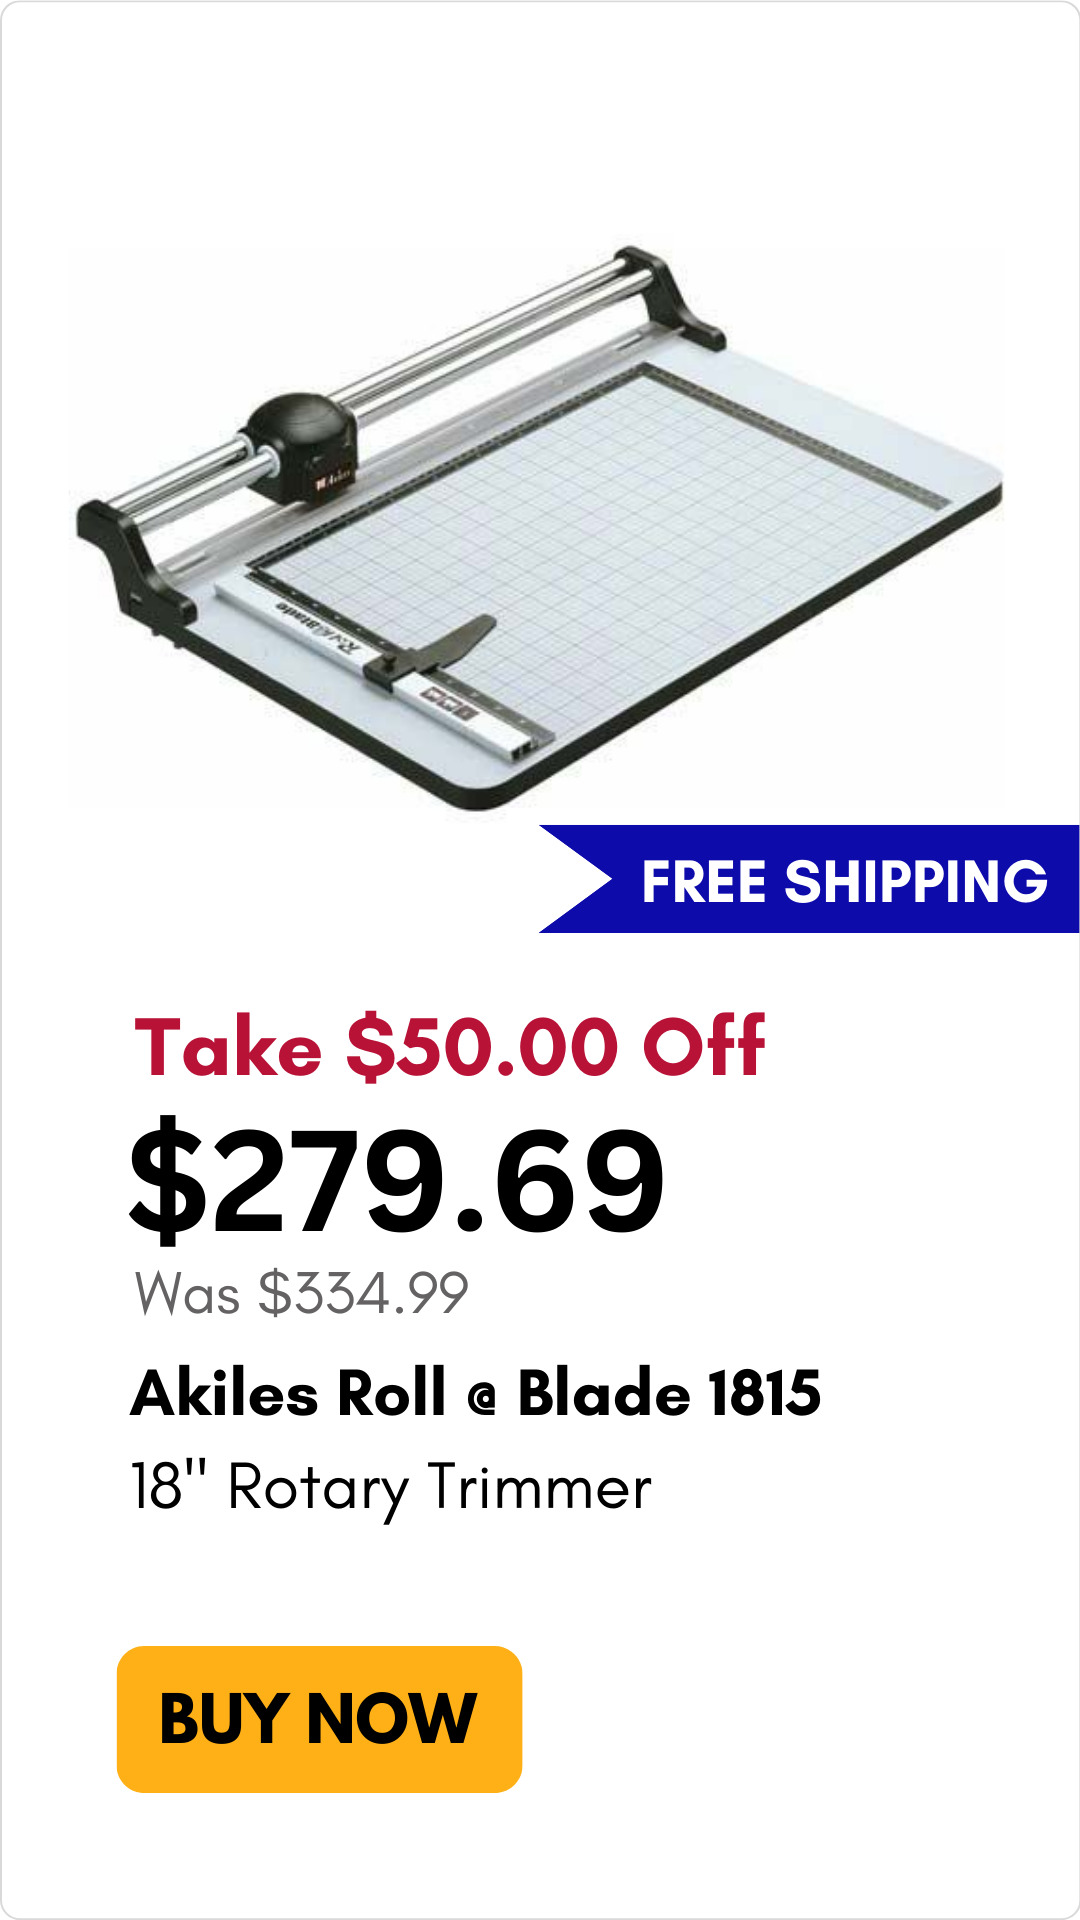 Akiles Roll @ Blade 1815 18" Rotary Trimmer